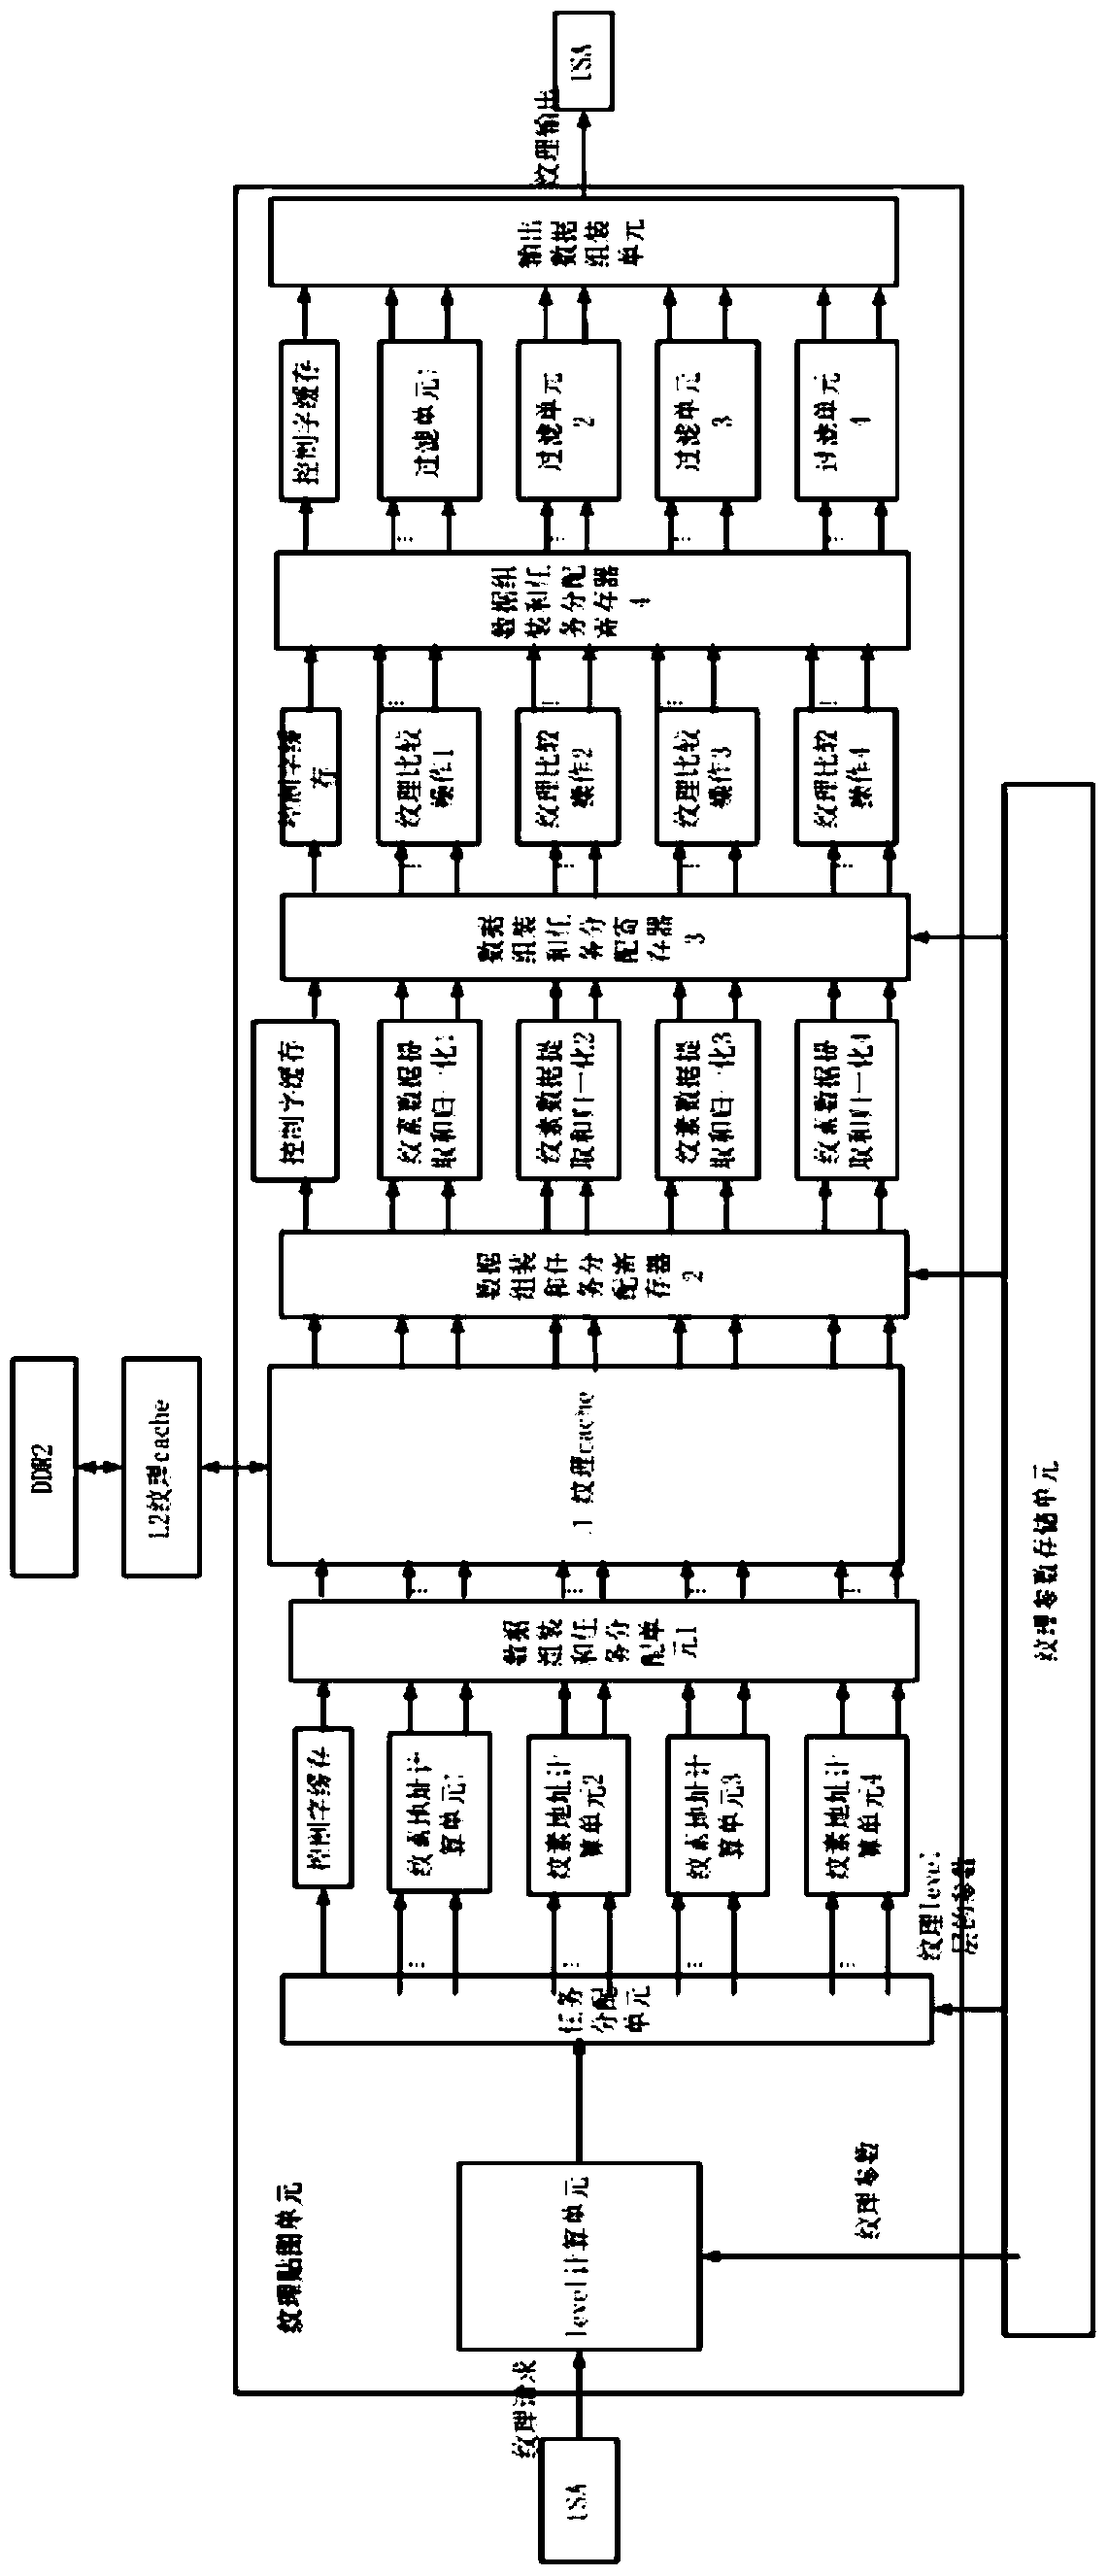 A Pipeline Texture Mapping Unit System